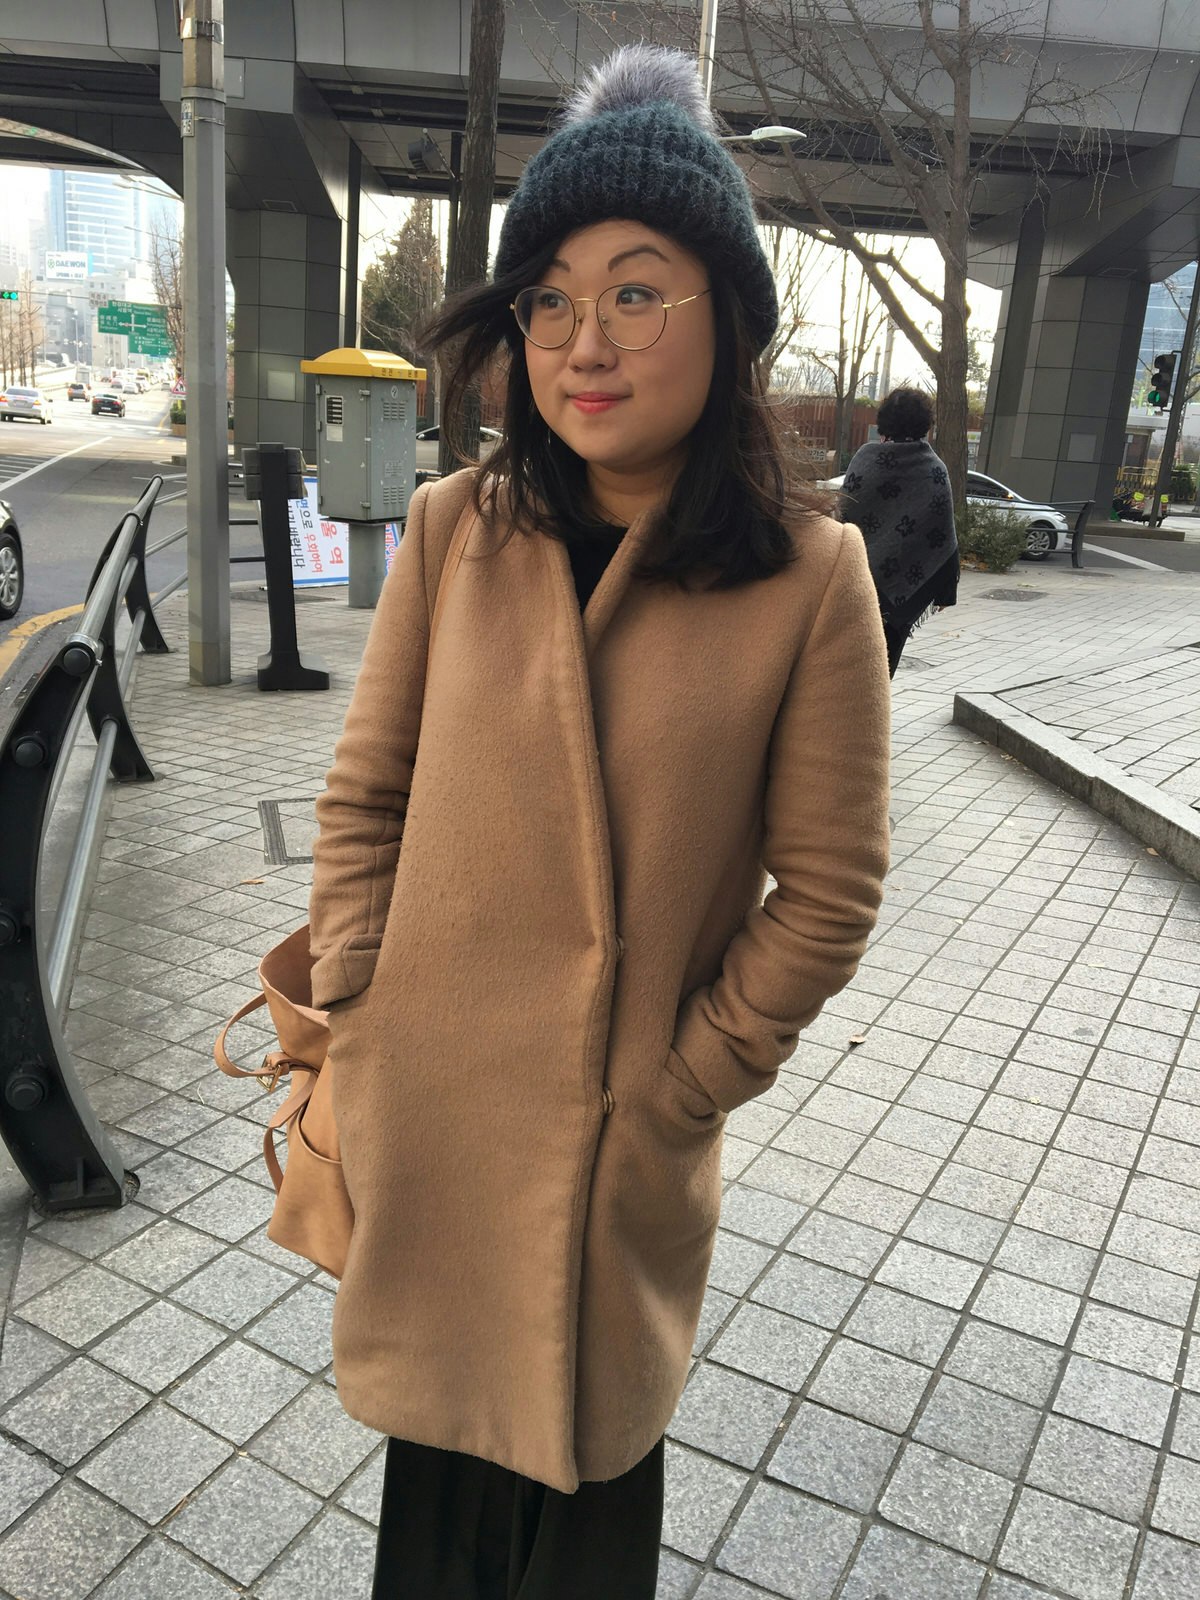 Hahna Yoon, Lonely Planet Local, wearing a beige overcoat and grey wool hat